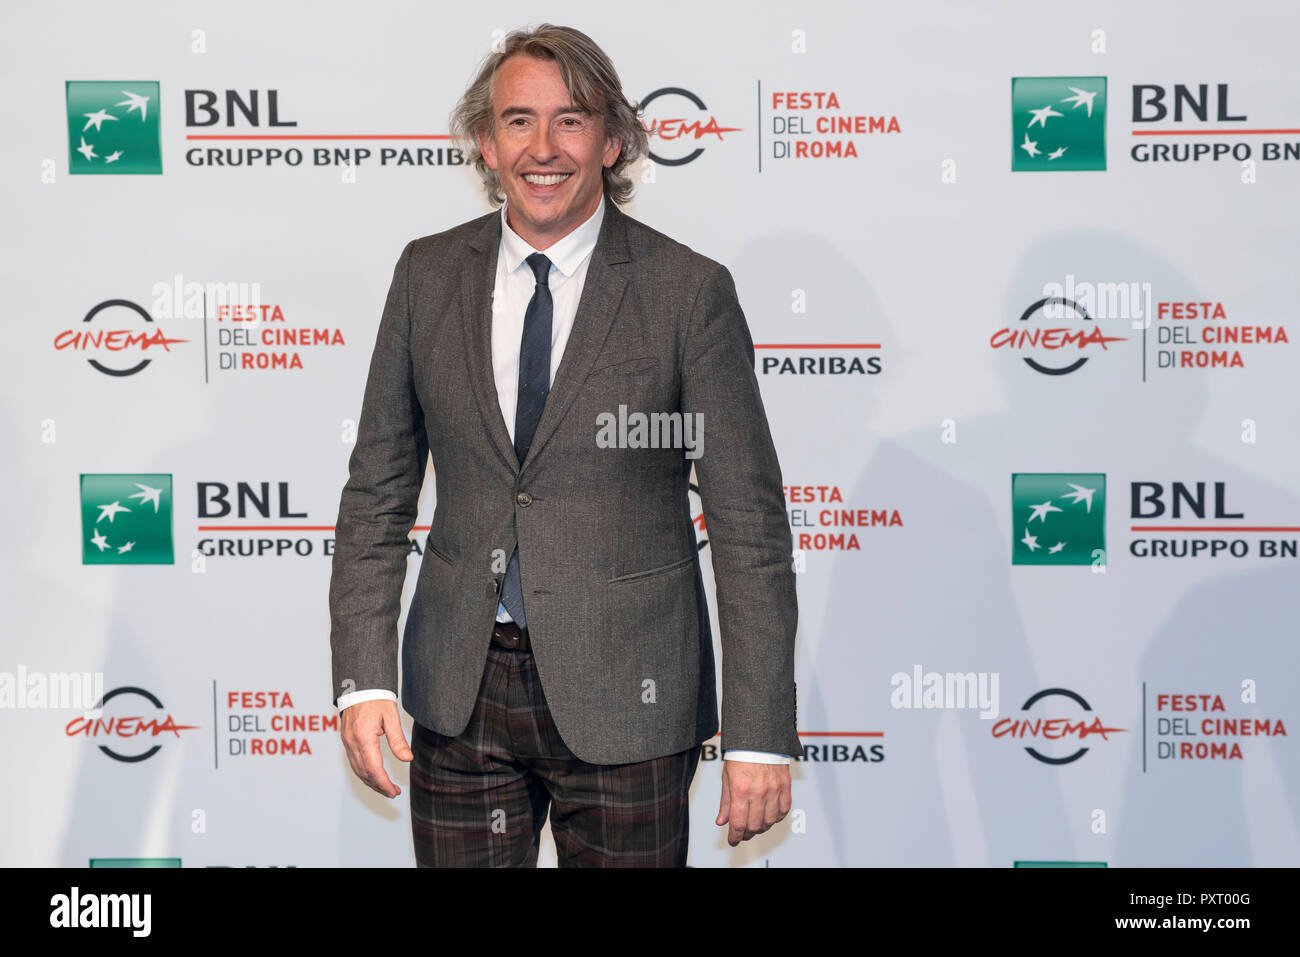 Rome, Italy. 24th Oct 2018. Steve Coogan attending the photocall of Stan & Ollie at Rome Film Fest 2018 Credit: Silvia Gerbino/Alamy Live News Credit: Silvia Gerbino/Alamy Live News Stock Photo